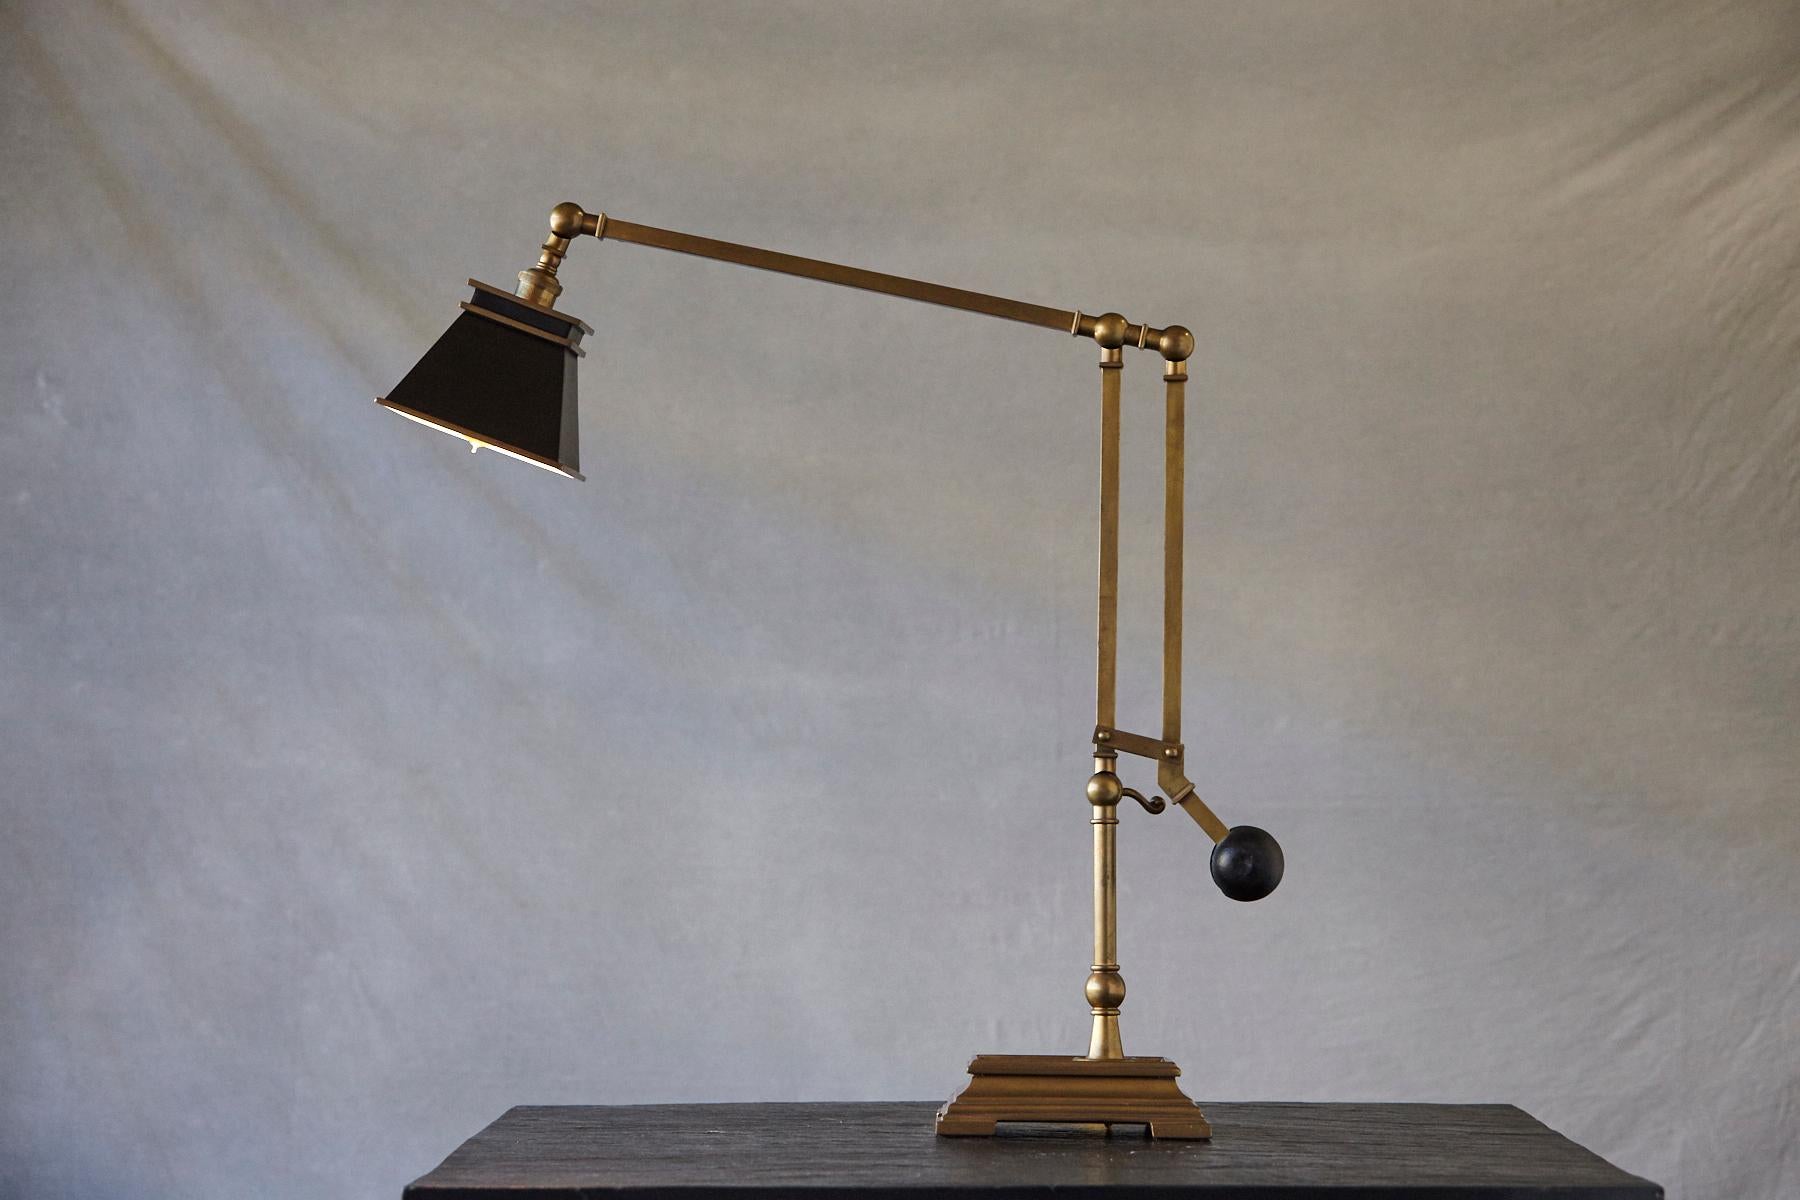 E.F. Chapman engravers weight balanced desk lamp in burnished brass with a square black shade by Visual Comfort & Co.

A solid desk lamp in excellent brass quality and finish, with a heavy black iron counter weight.
The little knob for the dimmer